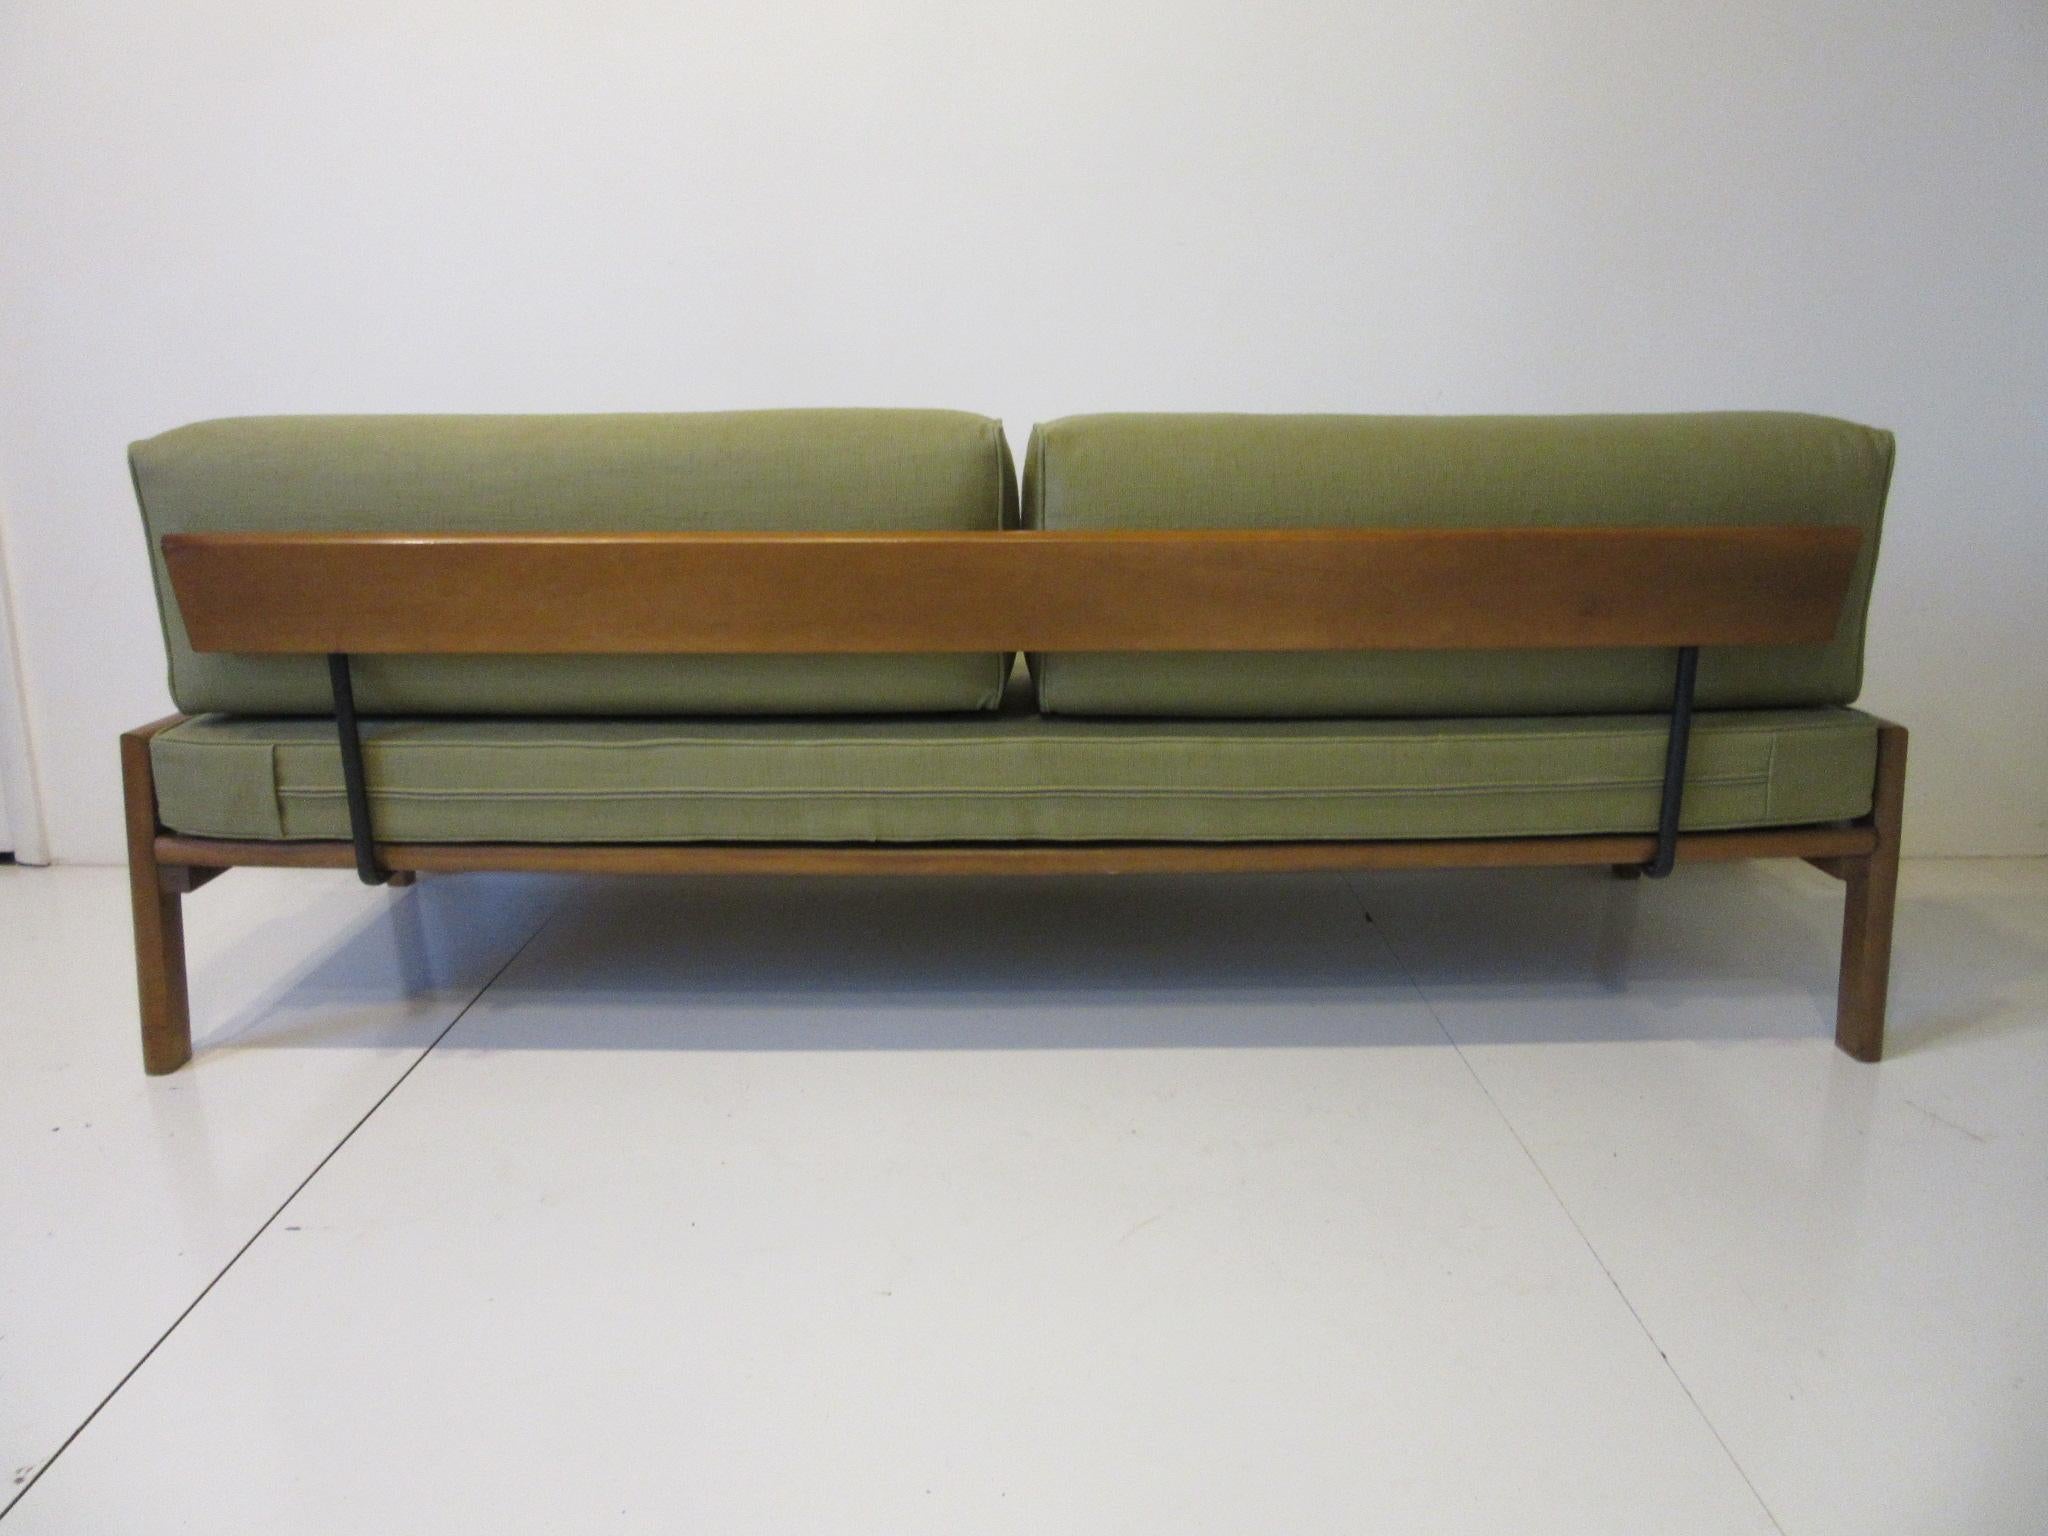 20th Century Midcentury Daybed / Sofa in the Style of Van Keppel Green